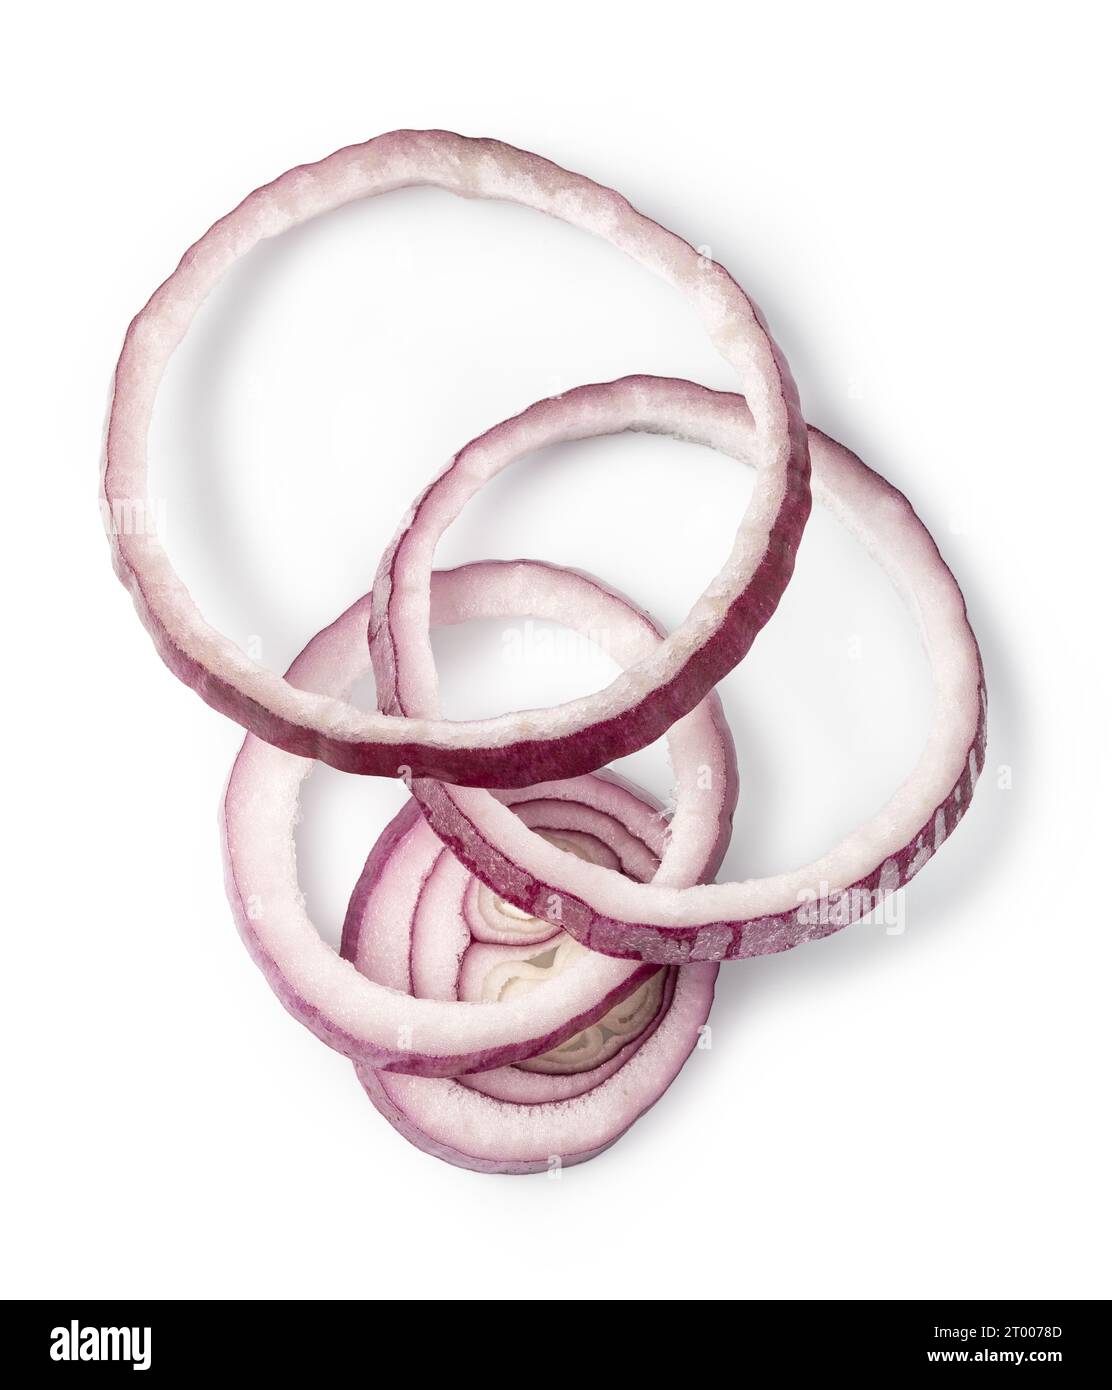 Sliced red onion ring Stock Photo